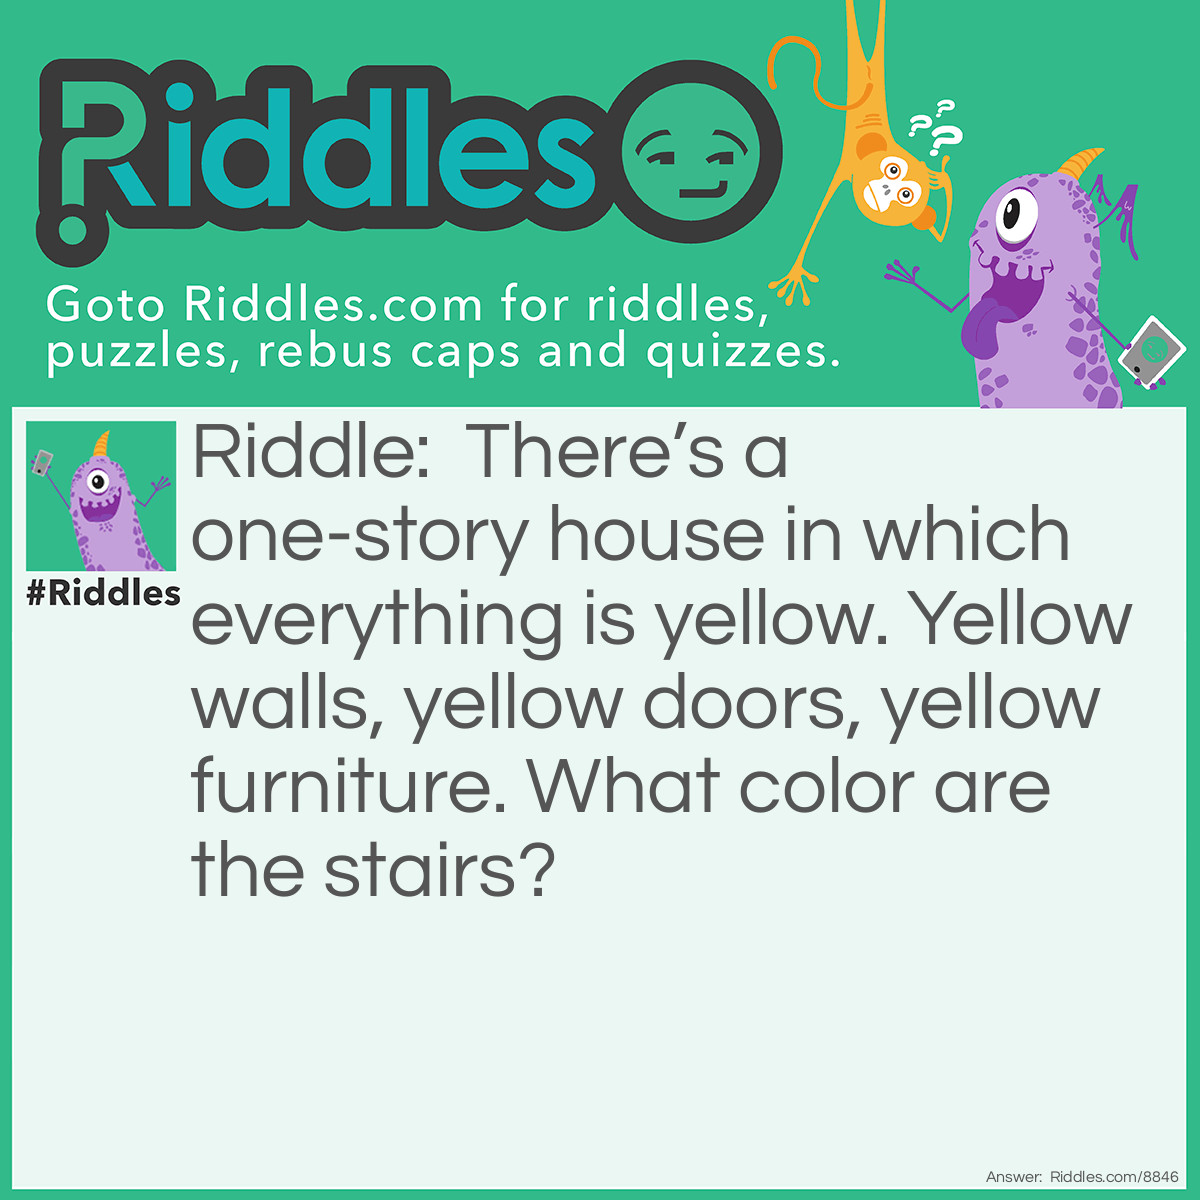 Riddle: There's a one-story house in which everything is yellow. Yellow walls, yellow doors, yellow furniture. What color are the stairs? Answer: There are no stairs its a one story house.